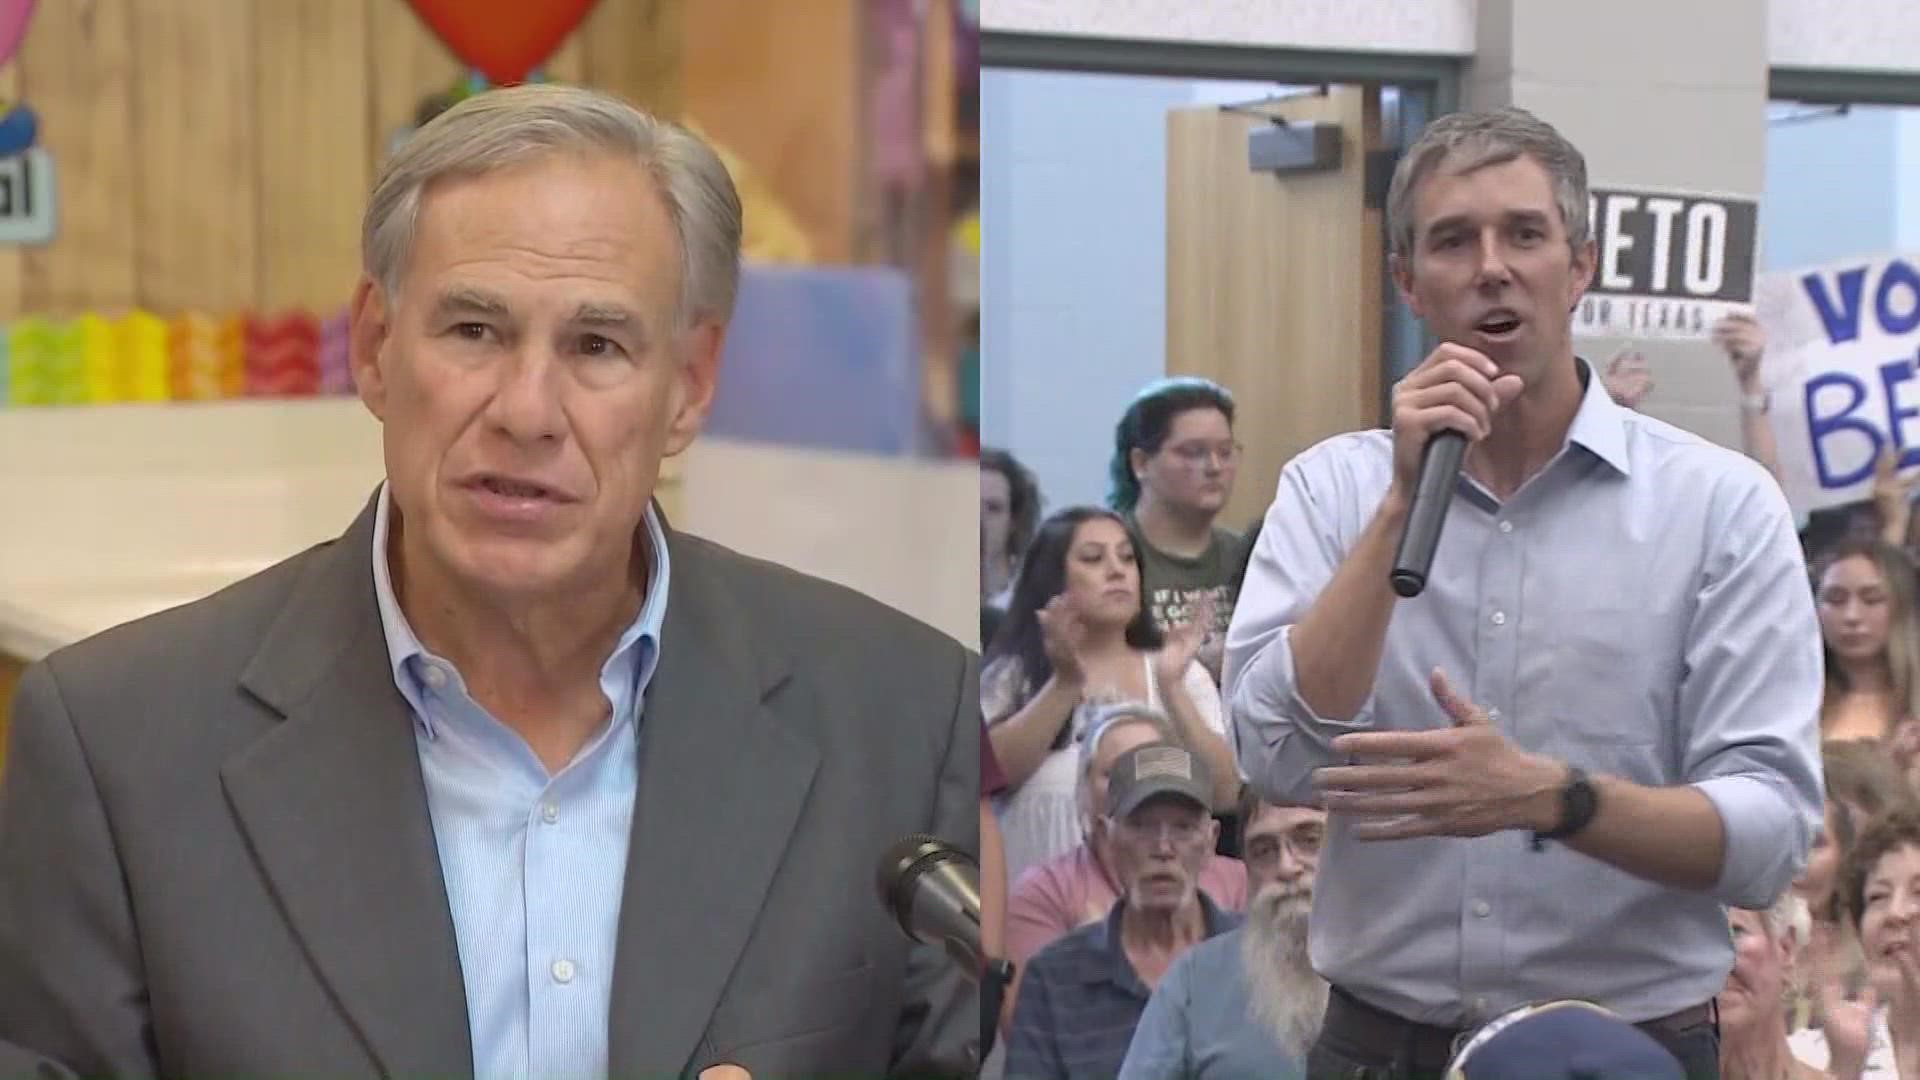 The Republican governor and the Democratic candidate to replace him were both in North Texas on Thursday.